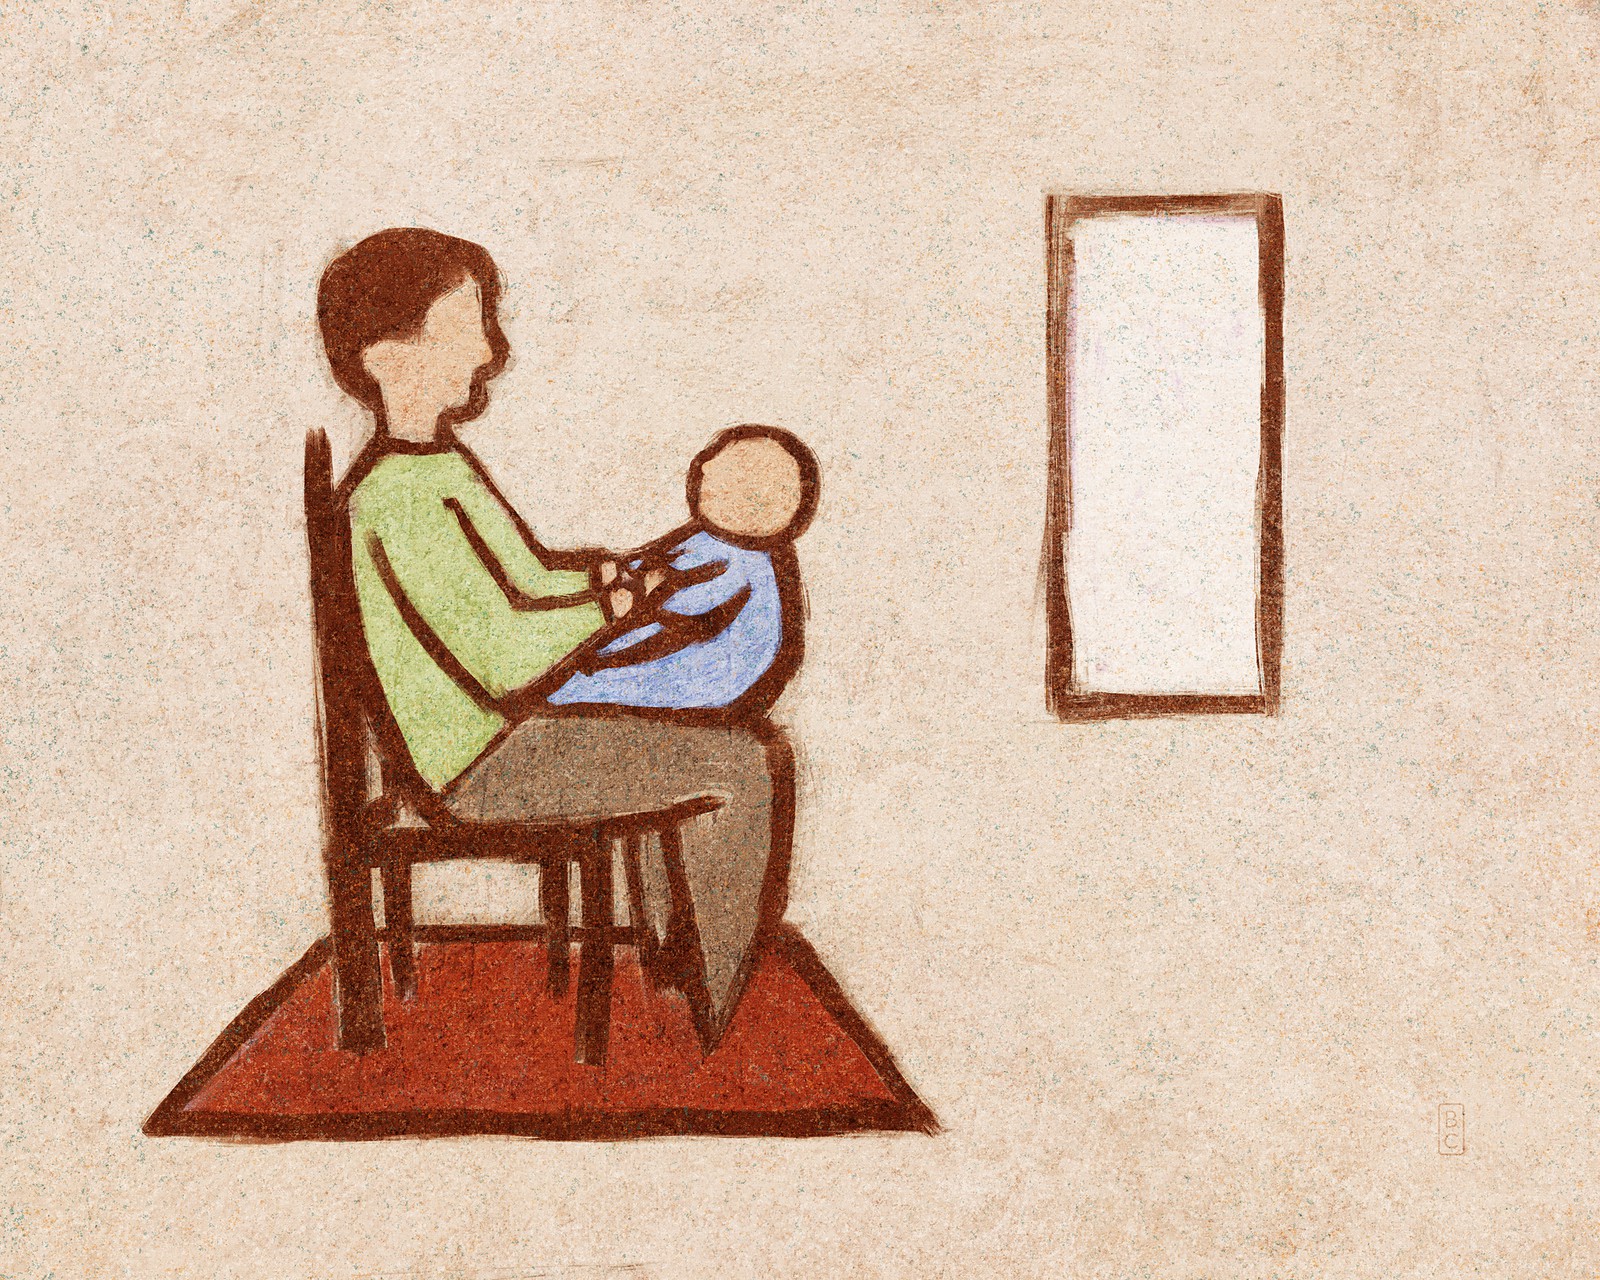 A man sitting in a chair holding a baby on his lap, with a window off to the side.